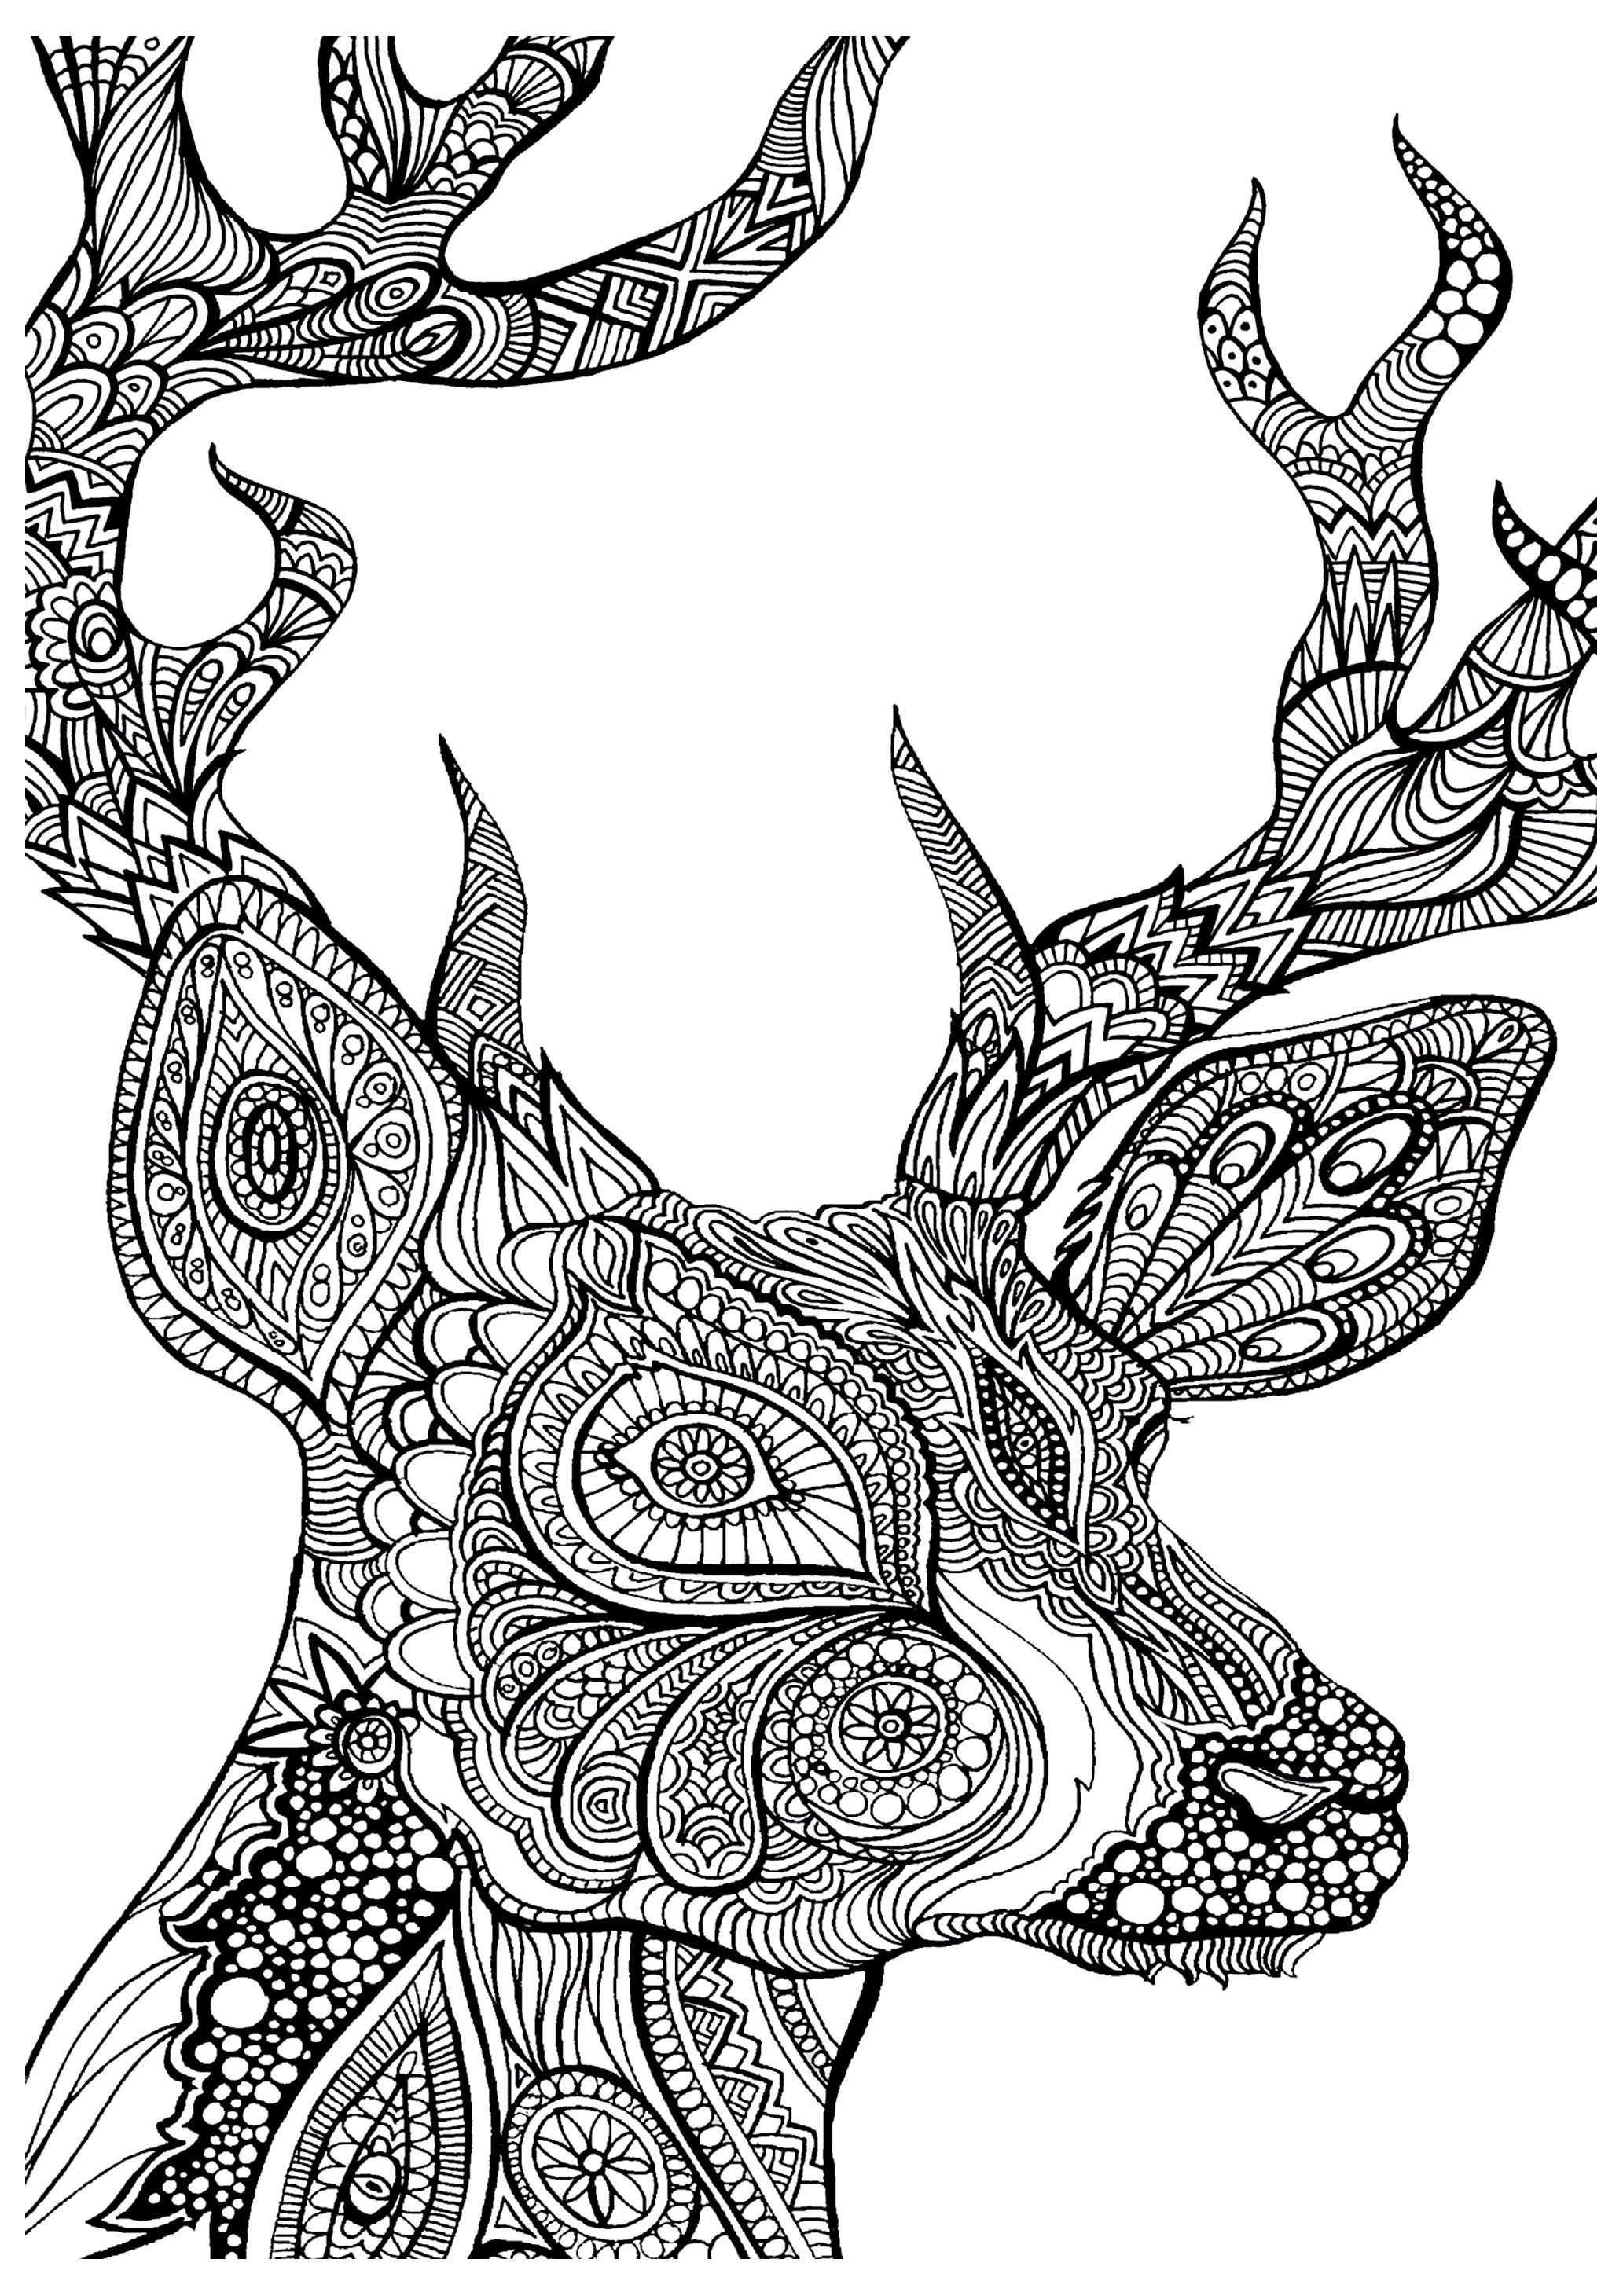 Coloring Pages For Adults Boys
 19 of the Best Adult Colouring Pages Free Printables for